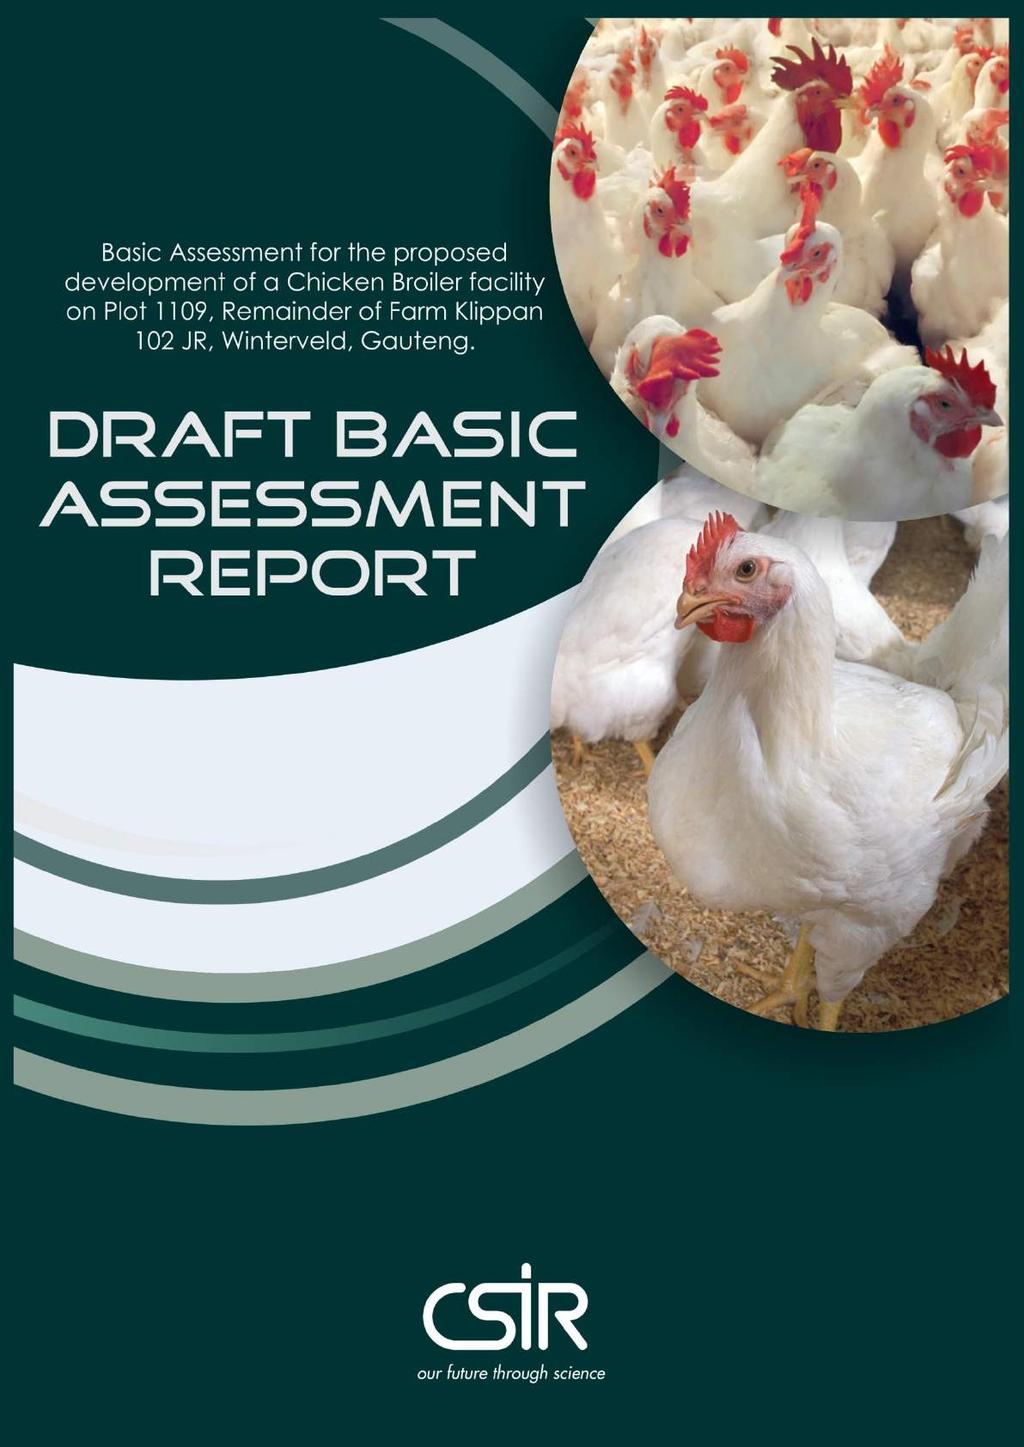 DRAFT BASIC ASSESSMENT REPORT Basic Assessm ent for the Nk un zi Agr icultural Co - Op erative (Pty) Ltd s pro posed